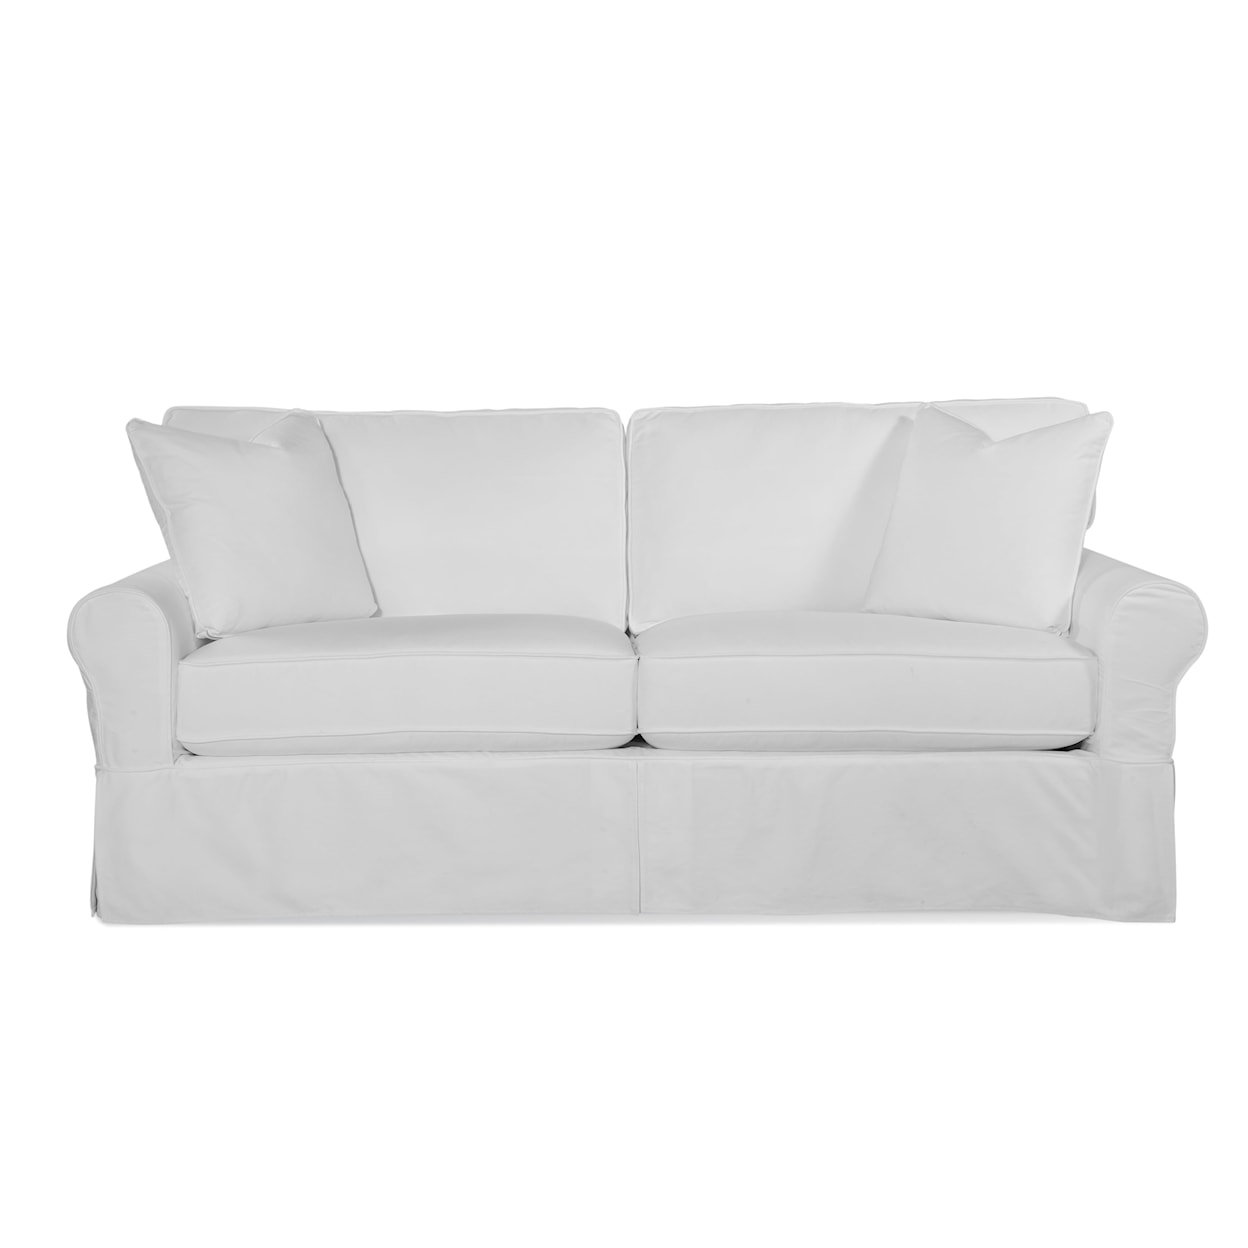 Braxton Culler Bedford Bedford 2 over 2 Sofa with Slipcover